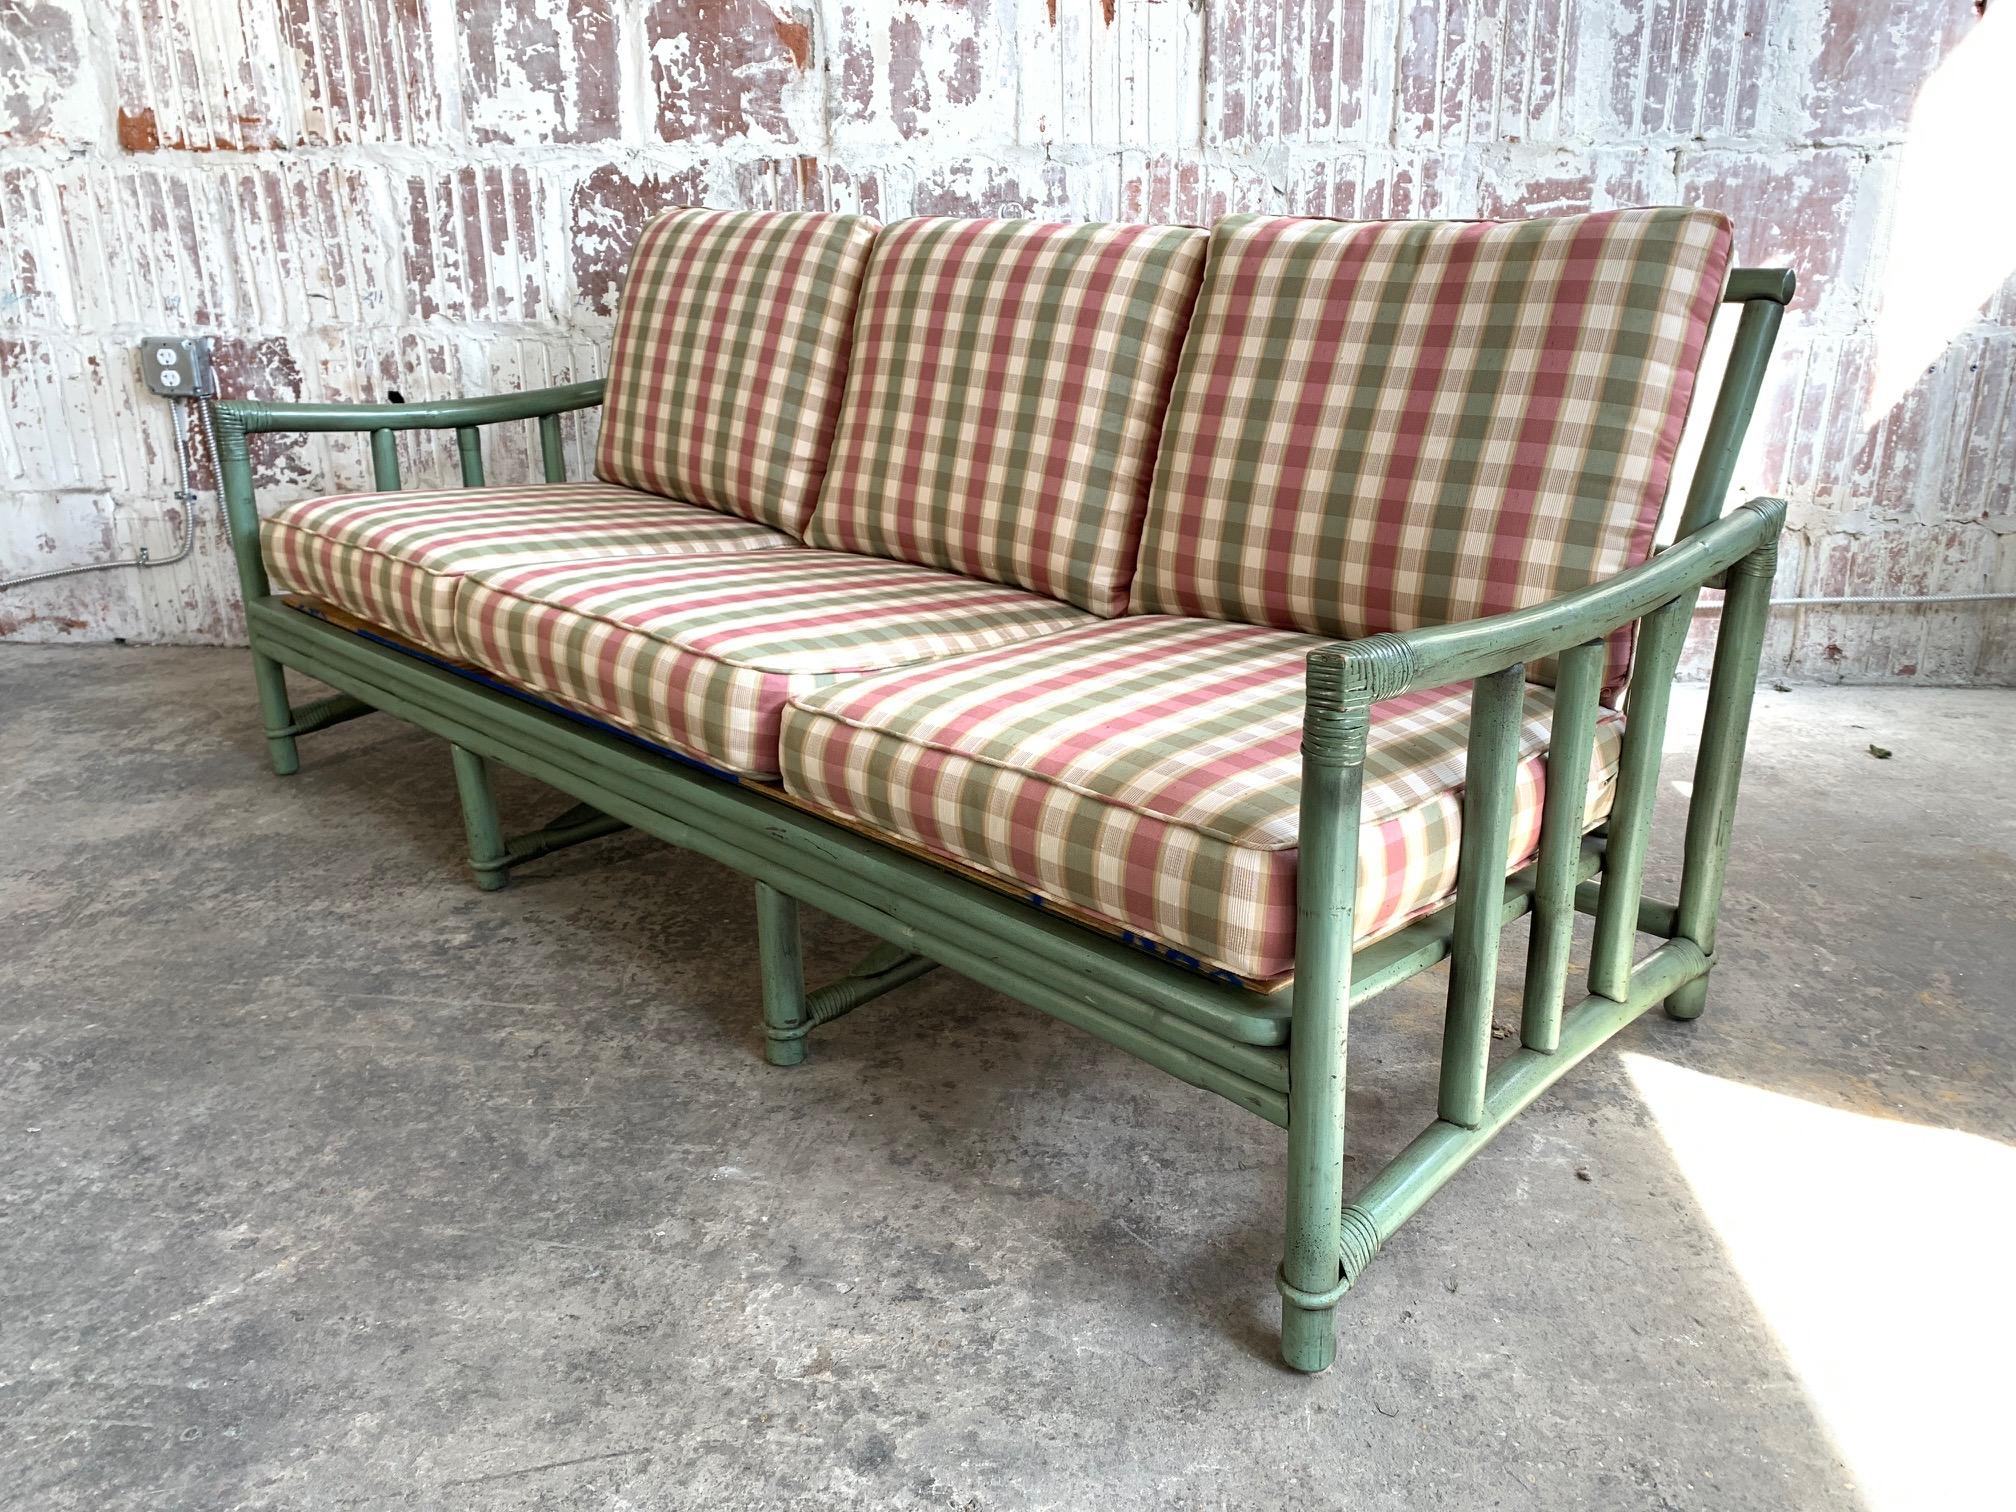 Midcentury rattan bamboo sofa by Ficks Reed features a 3-seat frame and a perfect amount of patina from age. Very good vintage condition.